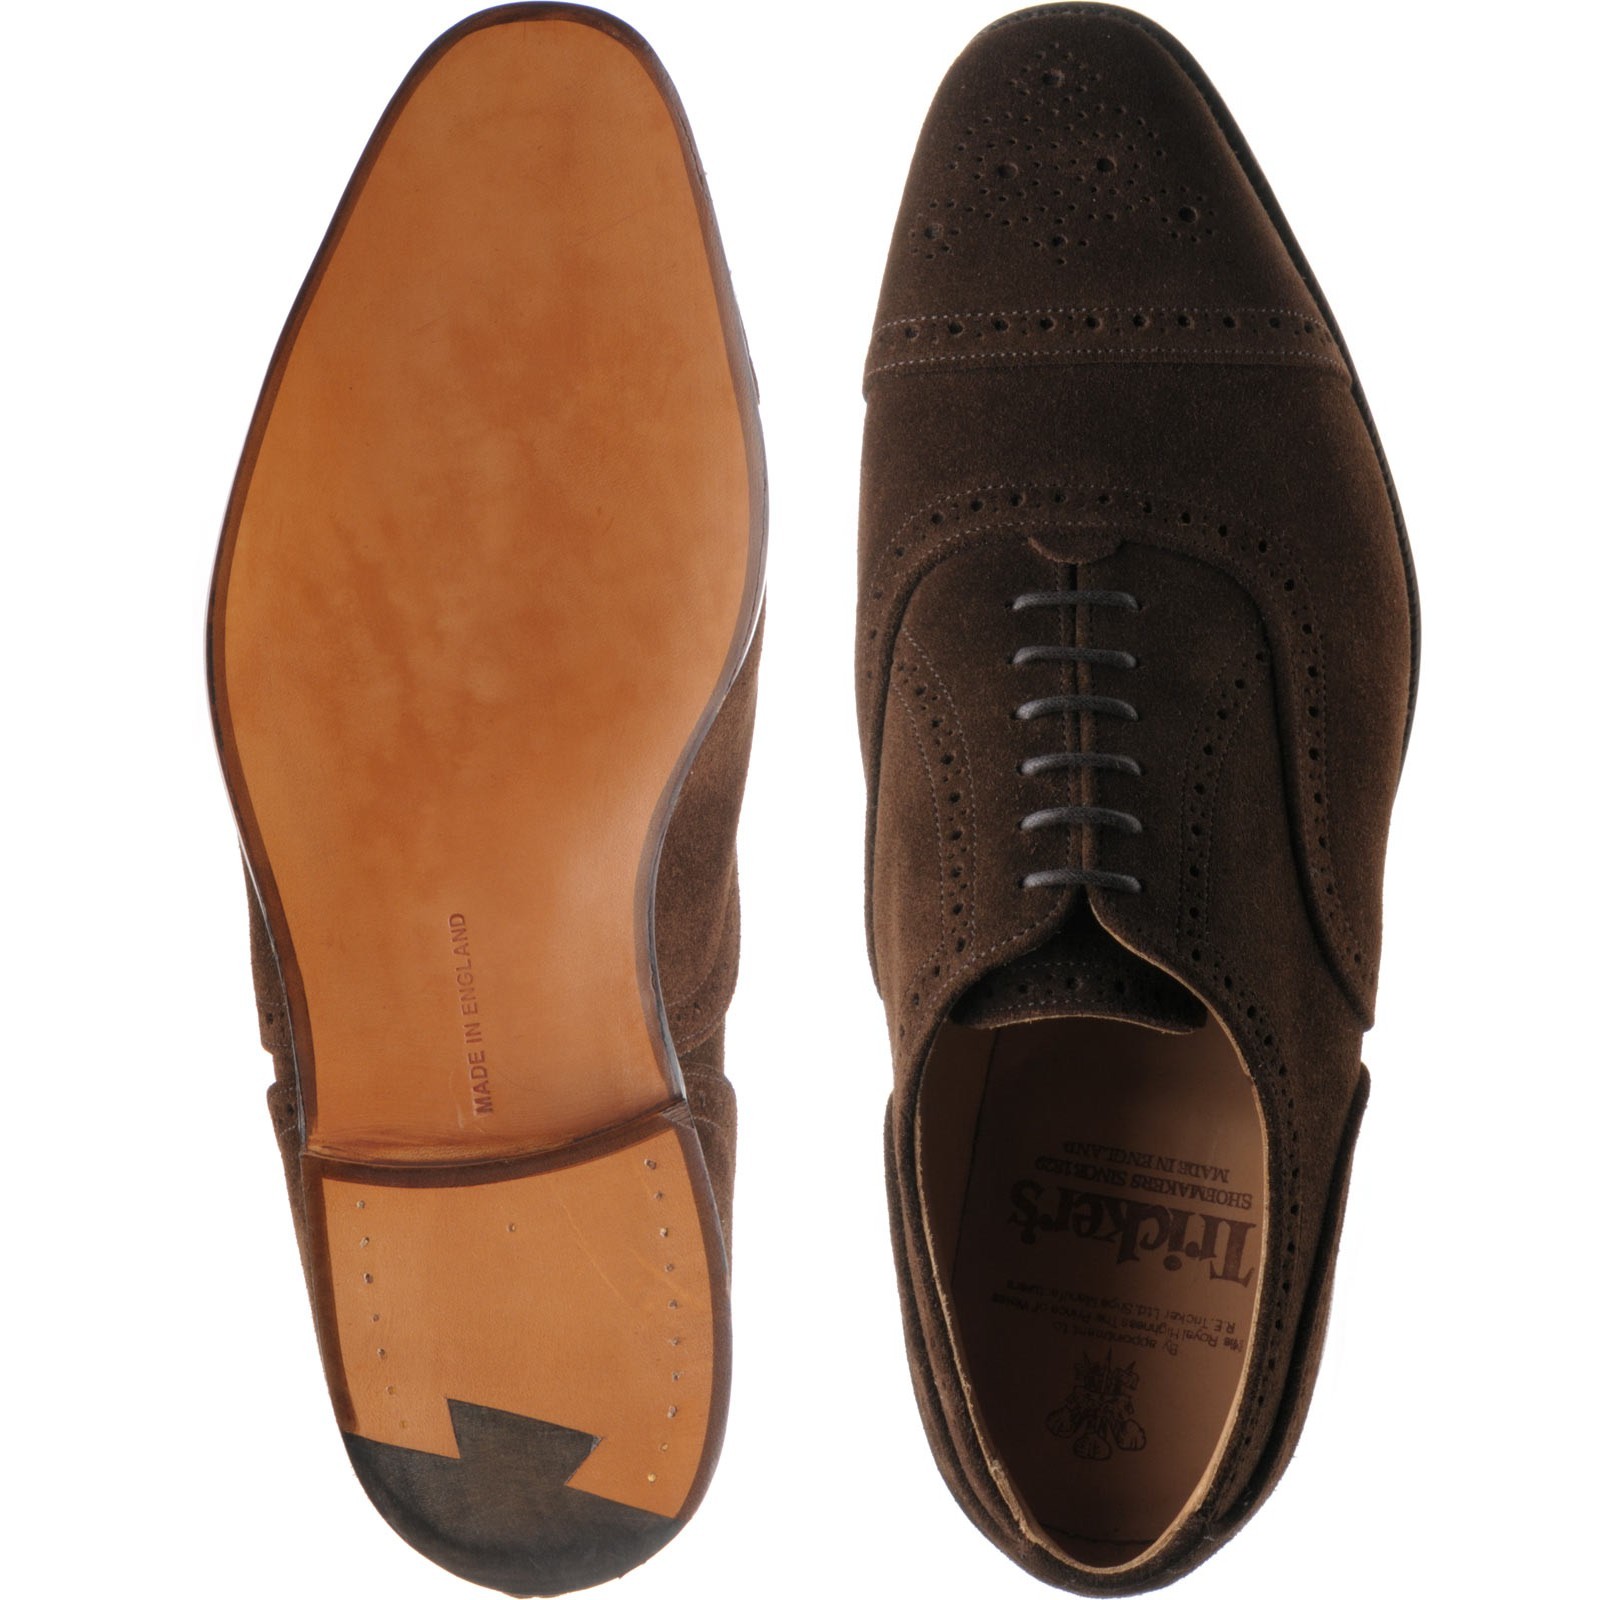 Trickers shoes | Trickers 1829 Collection | Kensington semi-brogues in ...